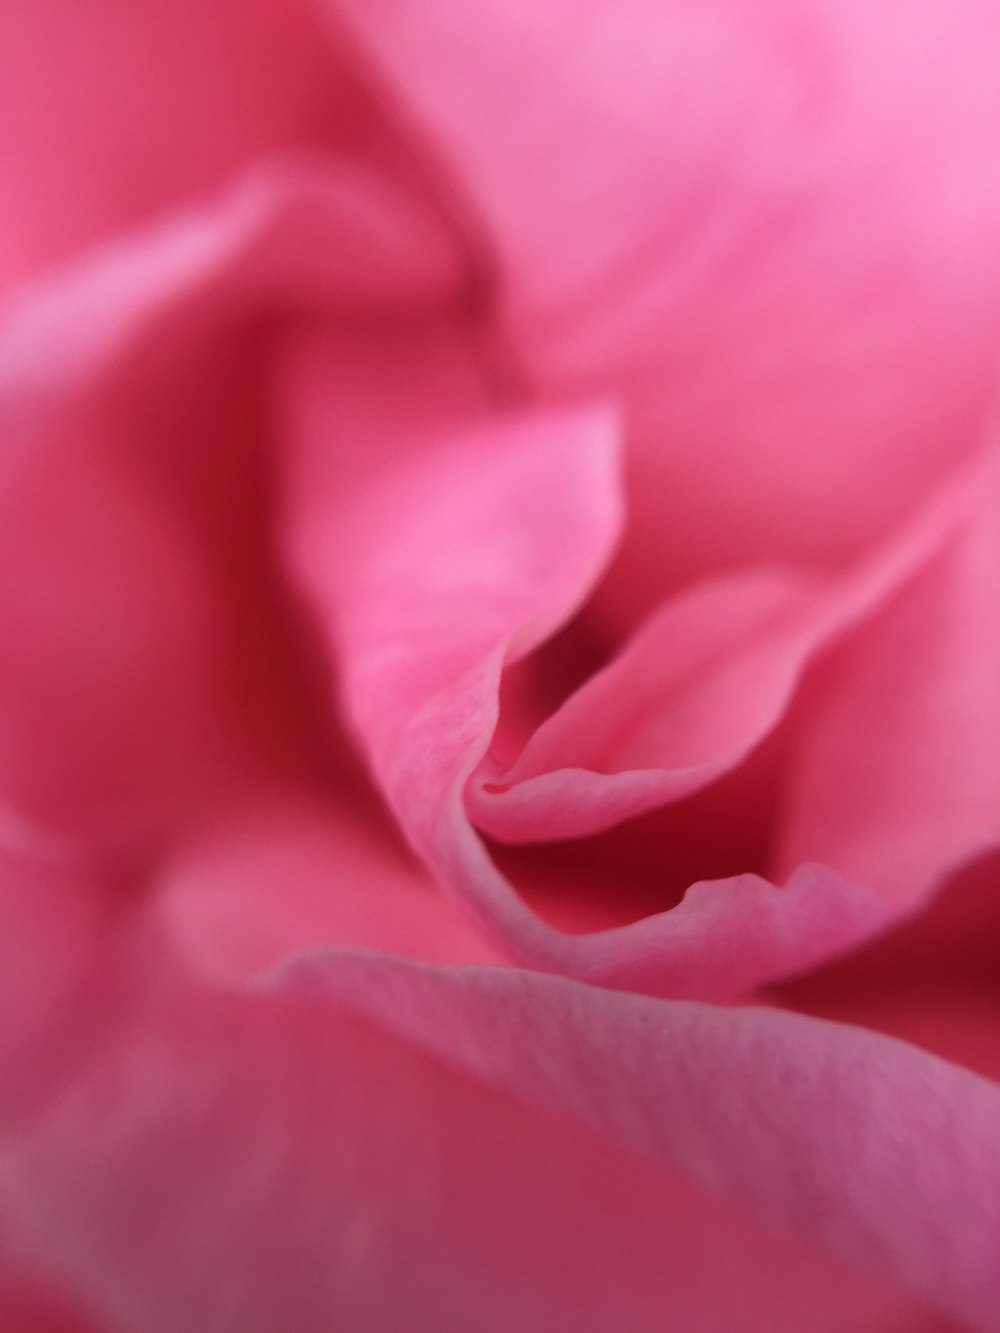 a close up view of a pink rose